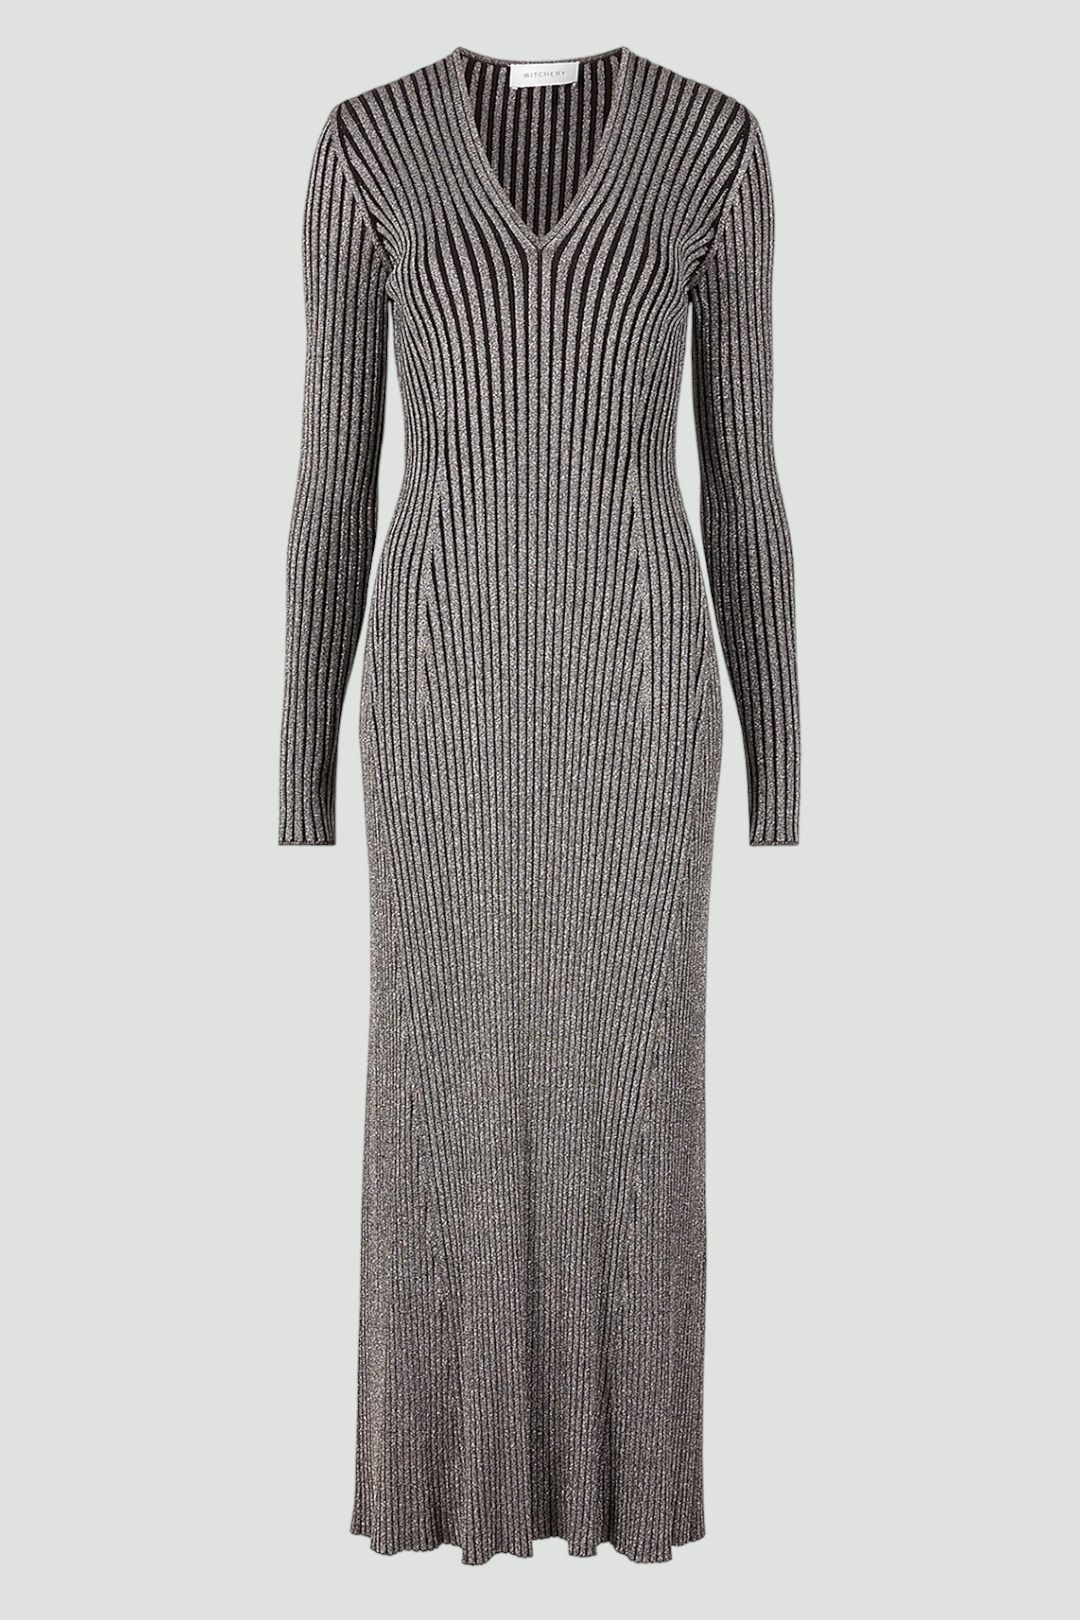 Witchery - Lurex Knit Midi Dress in Black and Silver